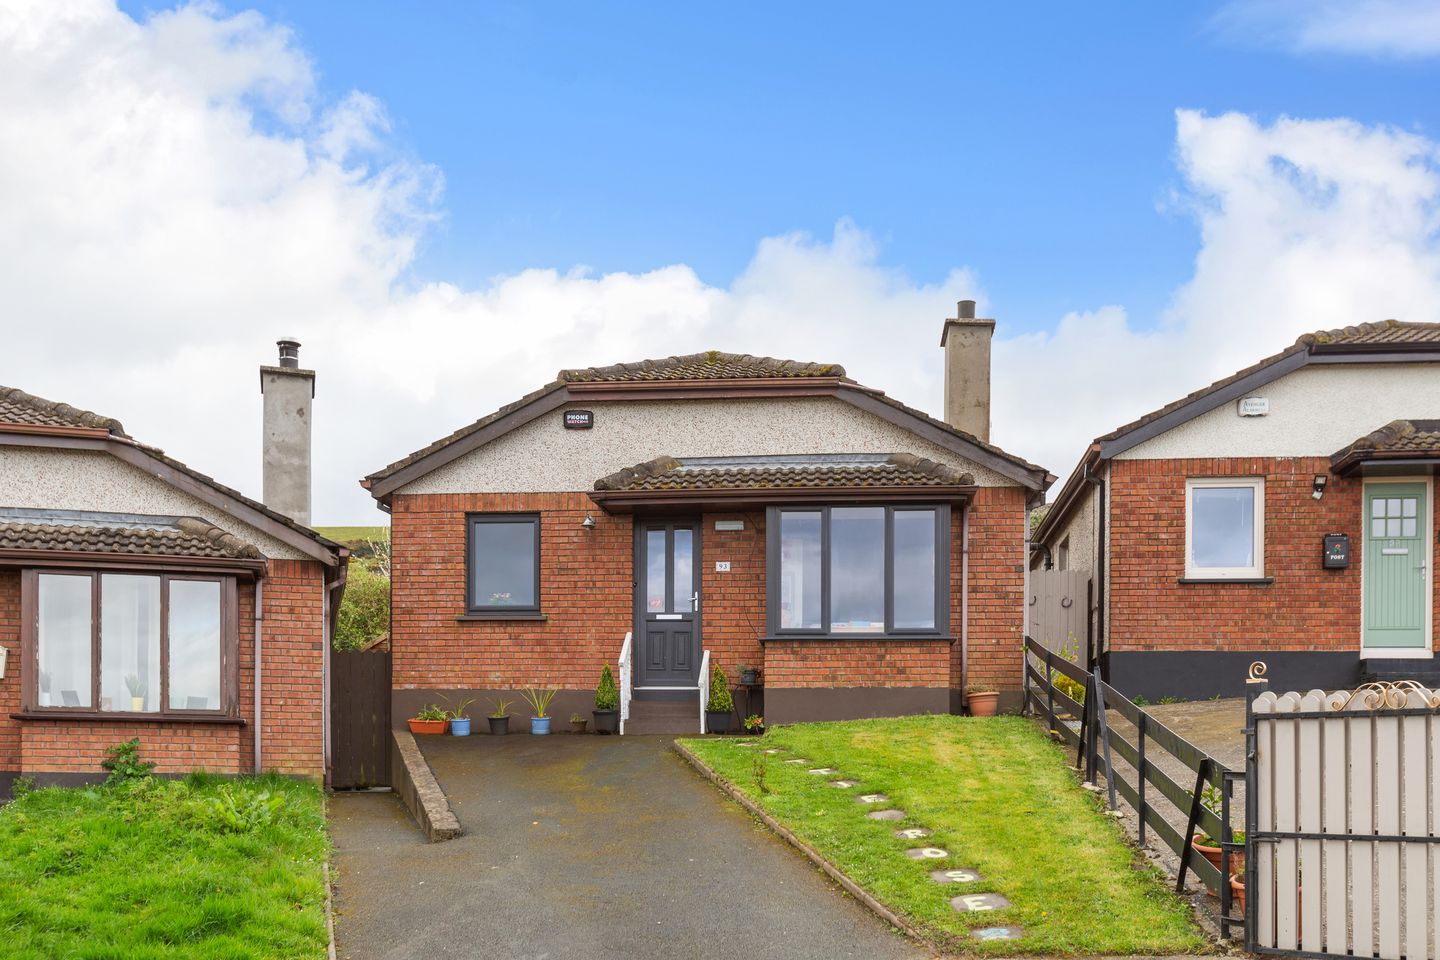 93 Rose Hill, Wicklow Town, Co. Wicklow, A67YW62